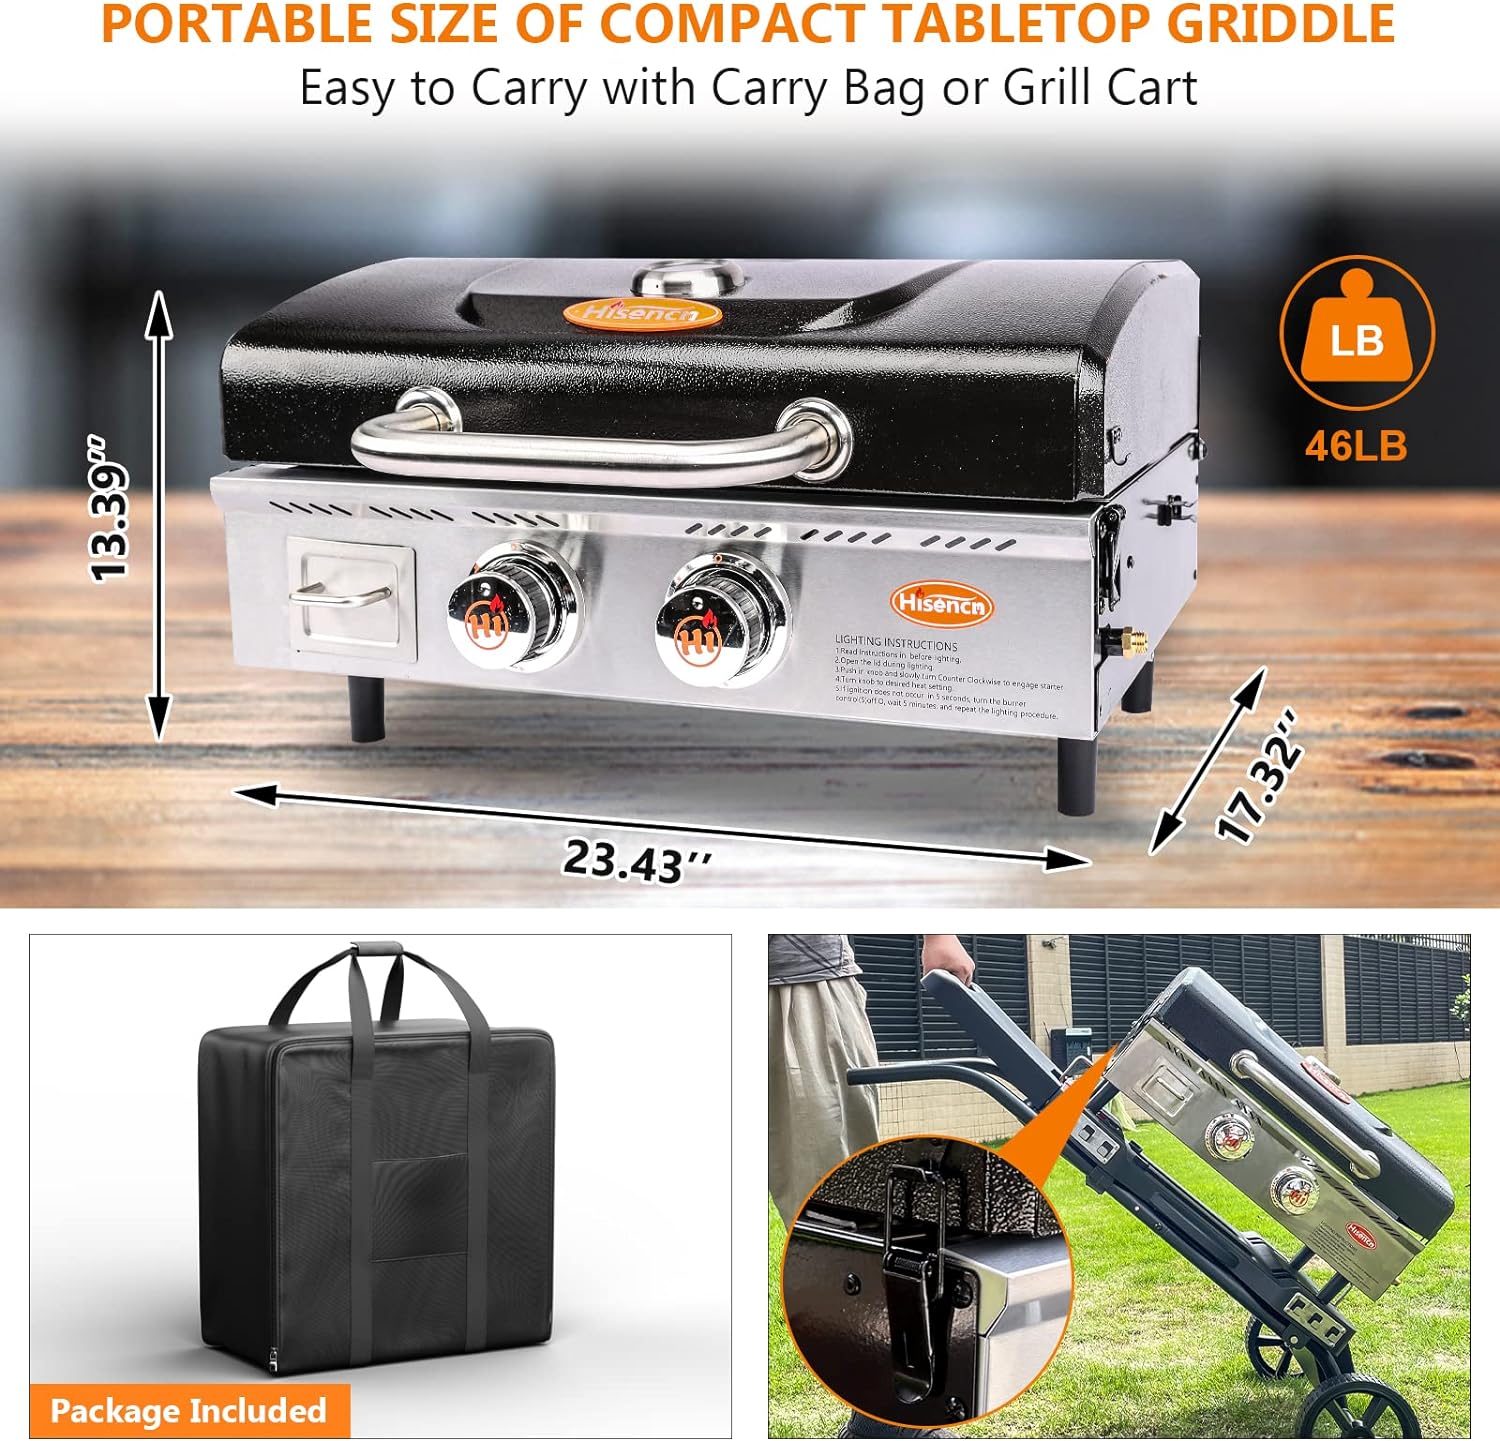 22 inch Propane 2 Burner Portable Table Top Griddle BBQ Grill with Hood for Outdoor Cooking Camping or Tailgating Etc, Kit with Carry Bag